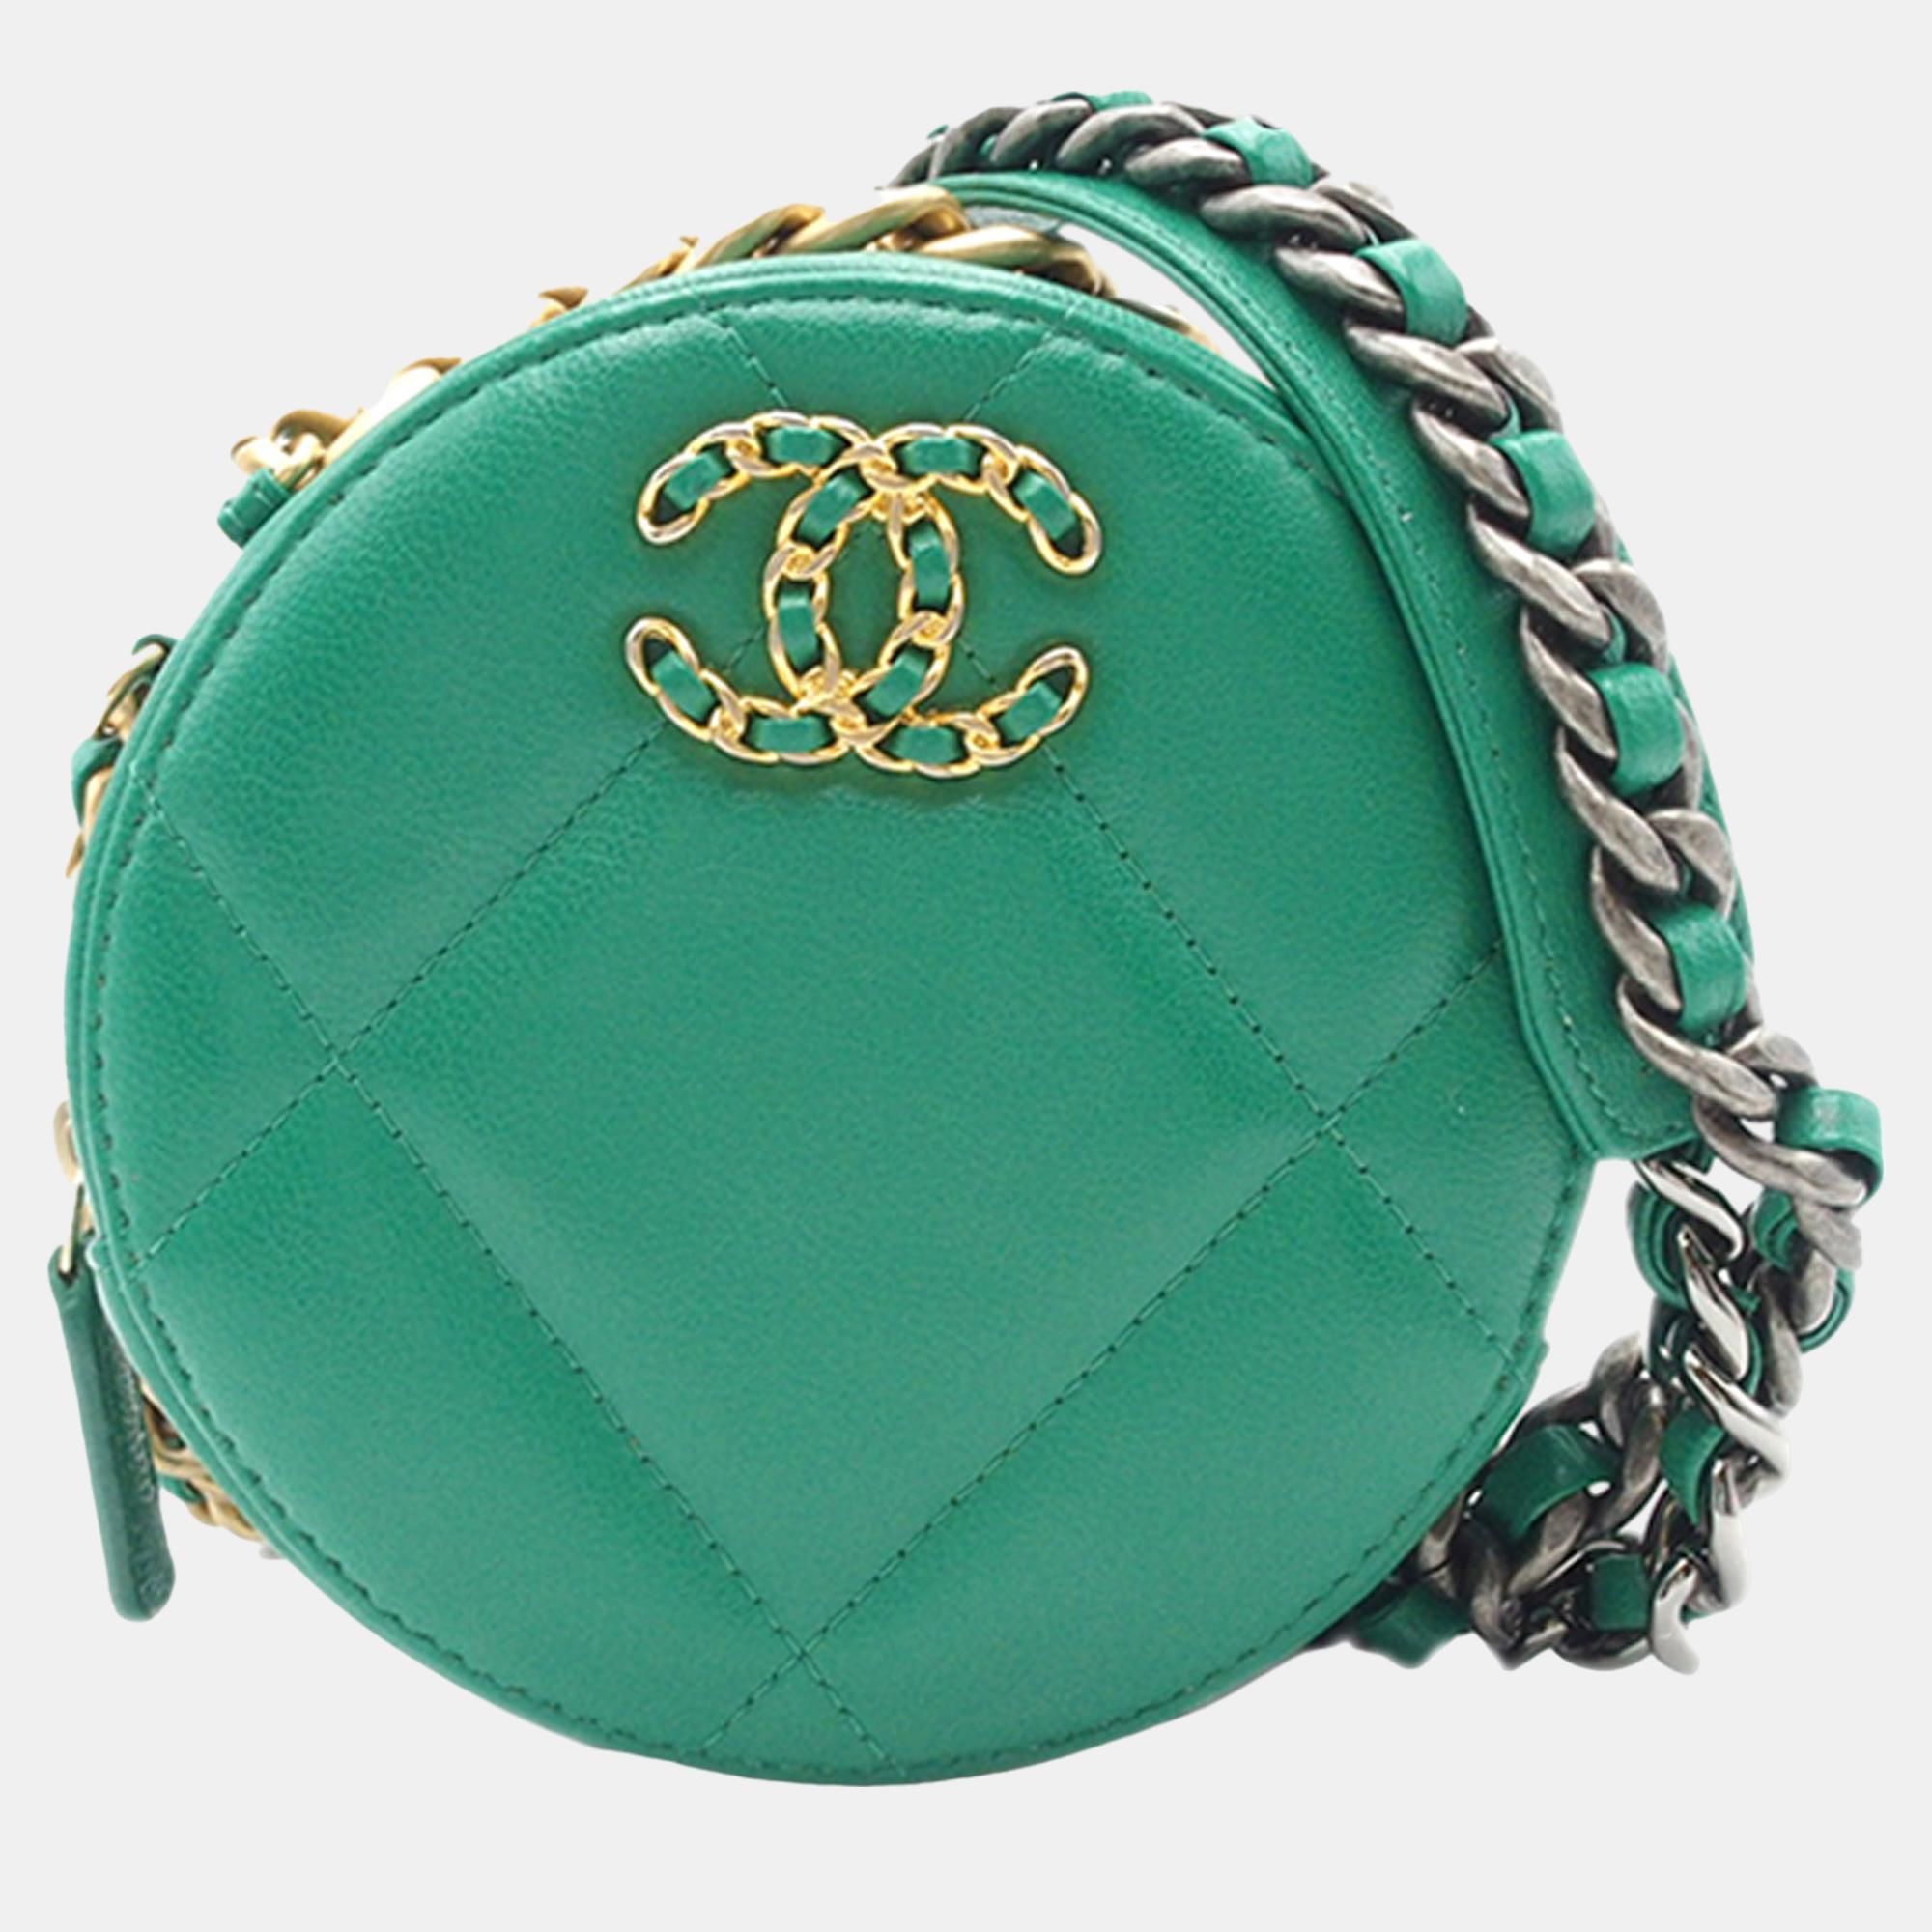 Chanel green 19 round lambskin clutch with chain